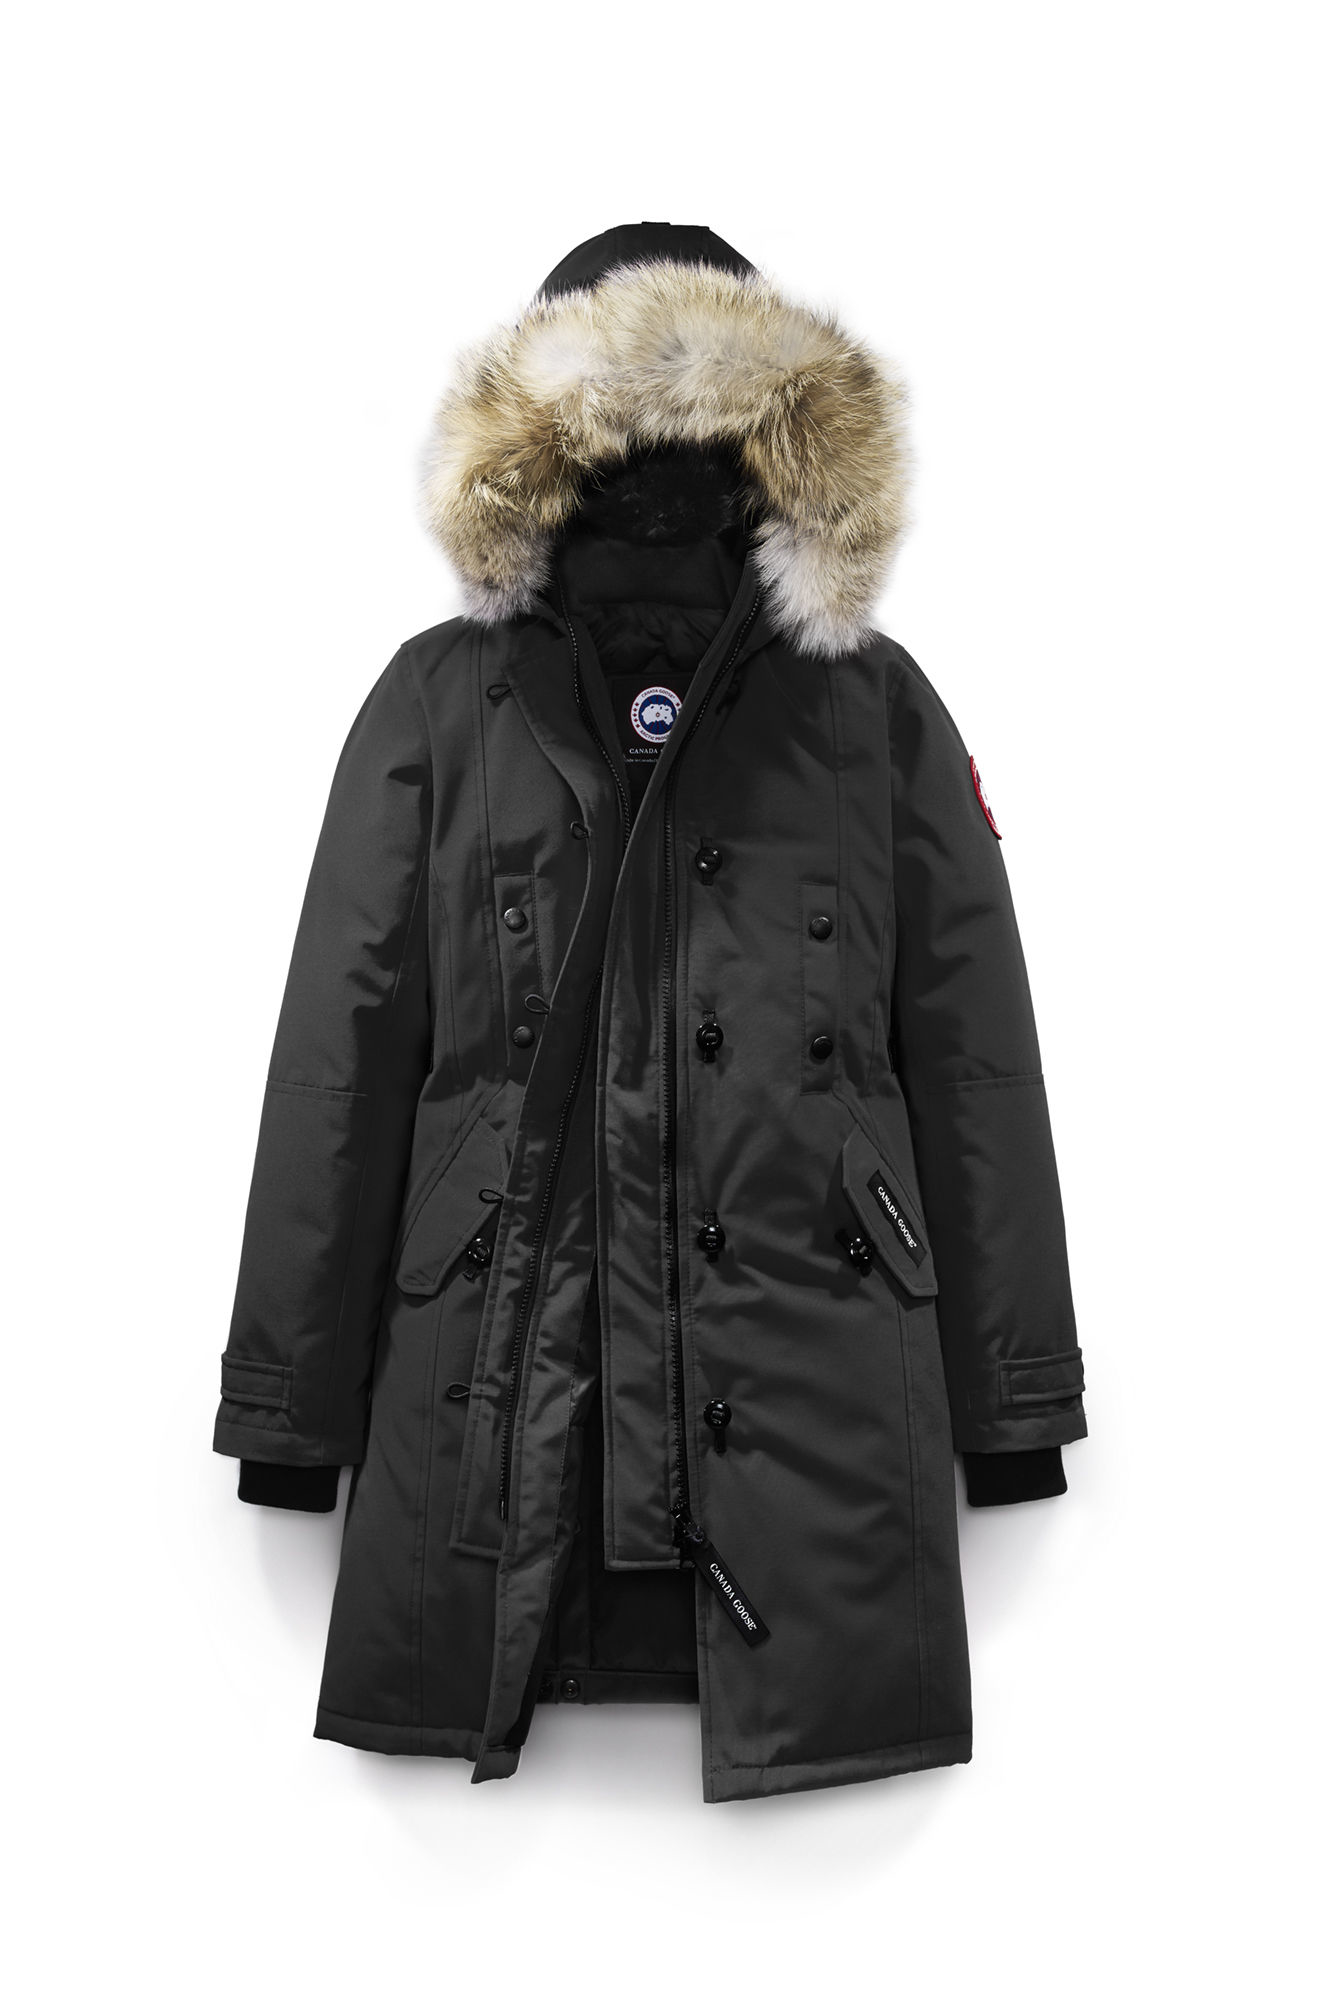 Canada Goose mens outlet authentic - Canada Goose Kensington | Shop Canada Goose Kensington Parka on ...